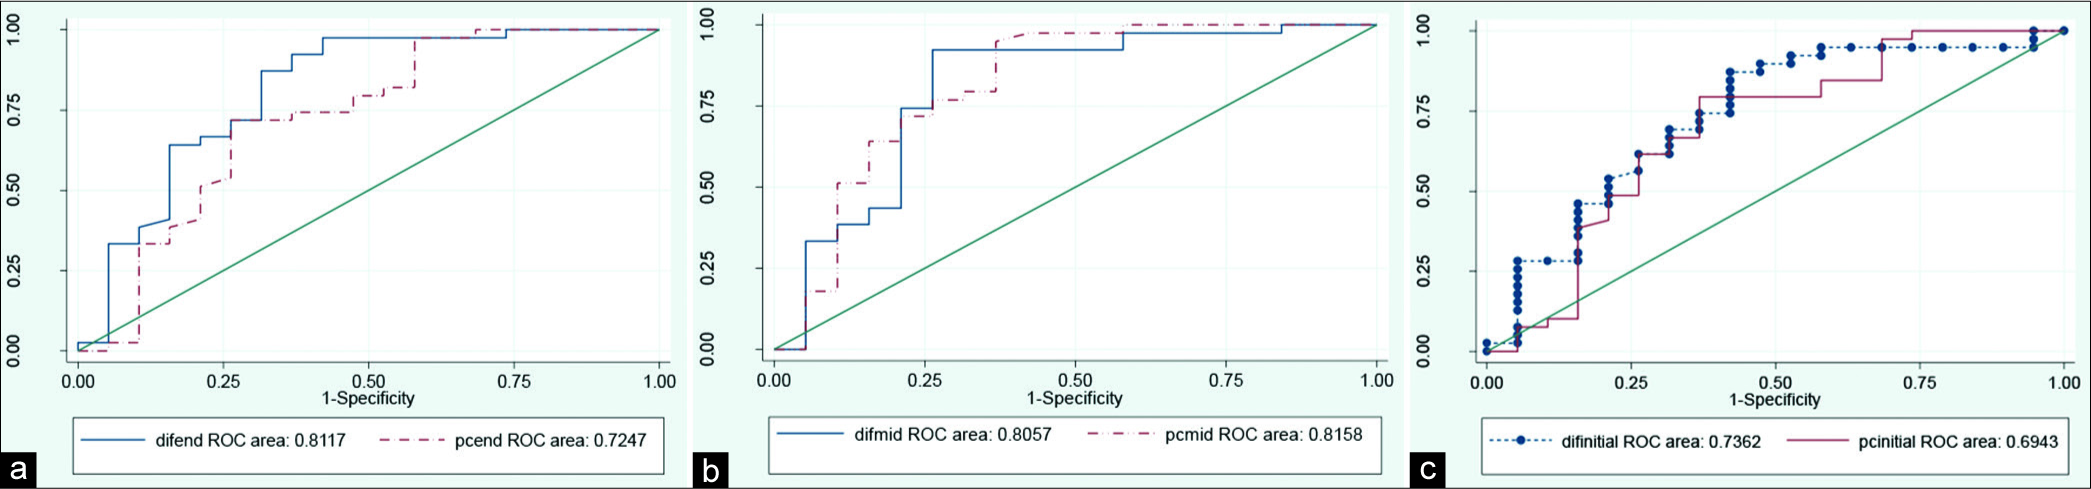 Comparison of diagnostic value of in-stent restenosis diagnosis using enhancement value versus post-contrast density; (a) initial part of stent, (b) middle part of stent, and (c) end part of stent.